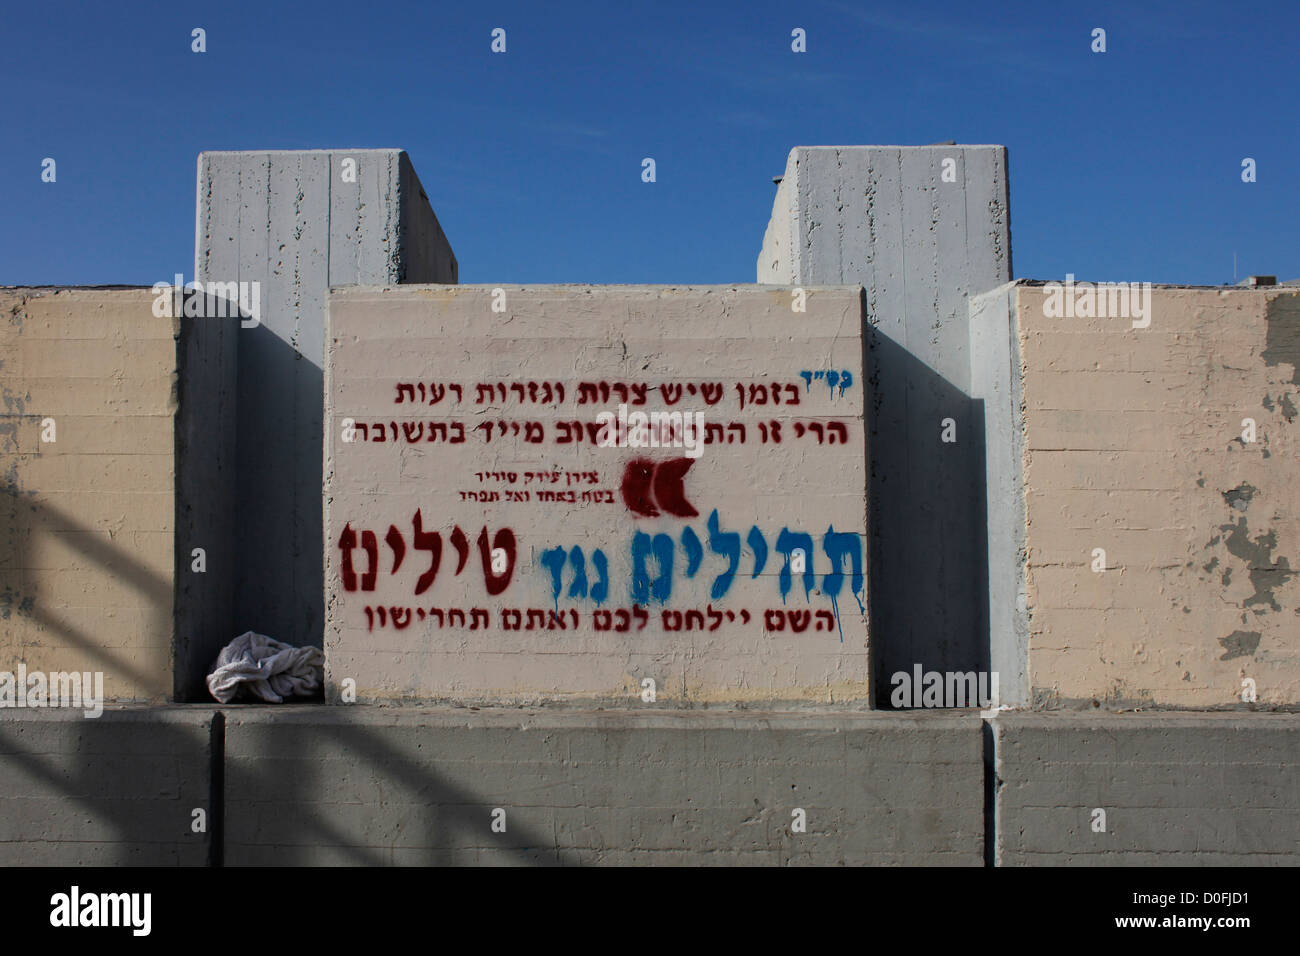 Exterior of a public bomb shelter sprayed with sentences in Hebrew which reads "Psalms against Rockets" and other slogans promoting Judaism faith in the town of Sderot southern Israel Stock Photo